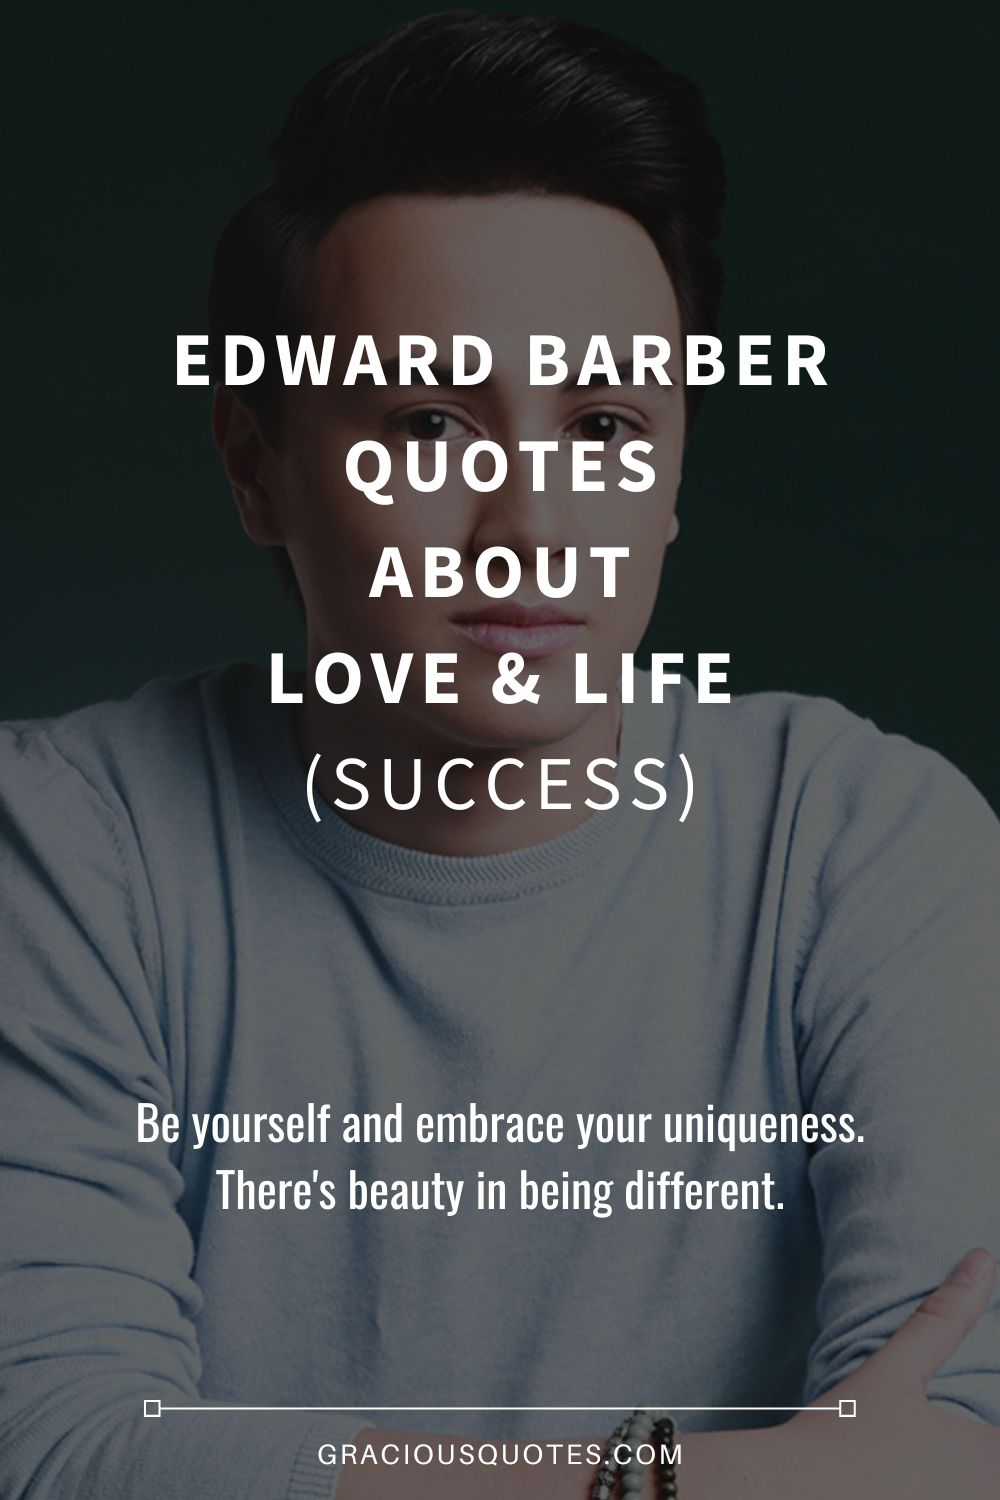 Edward Barber Quotes About Love & Life (SUCCESS) - Gracious Quotes